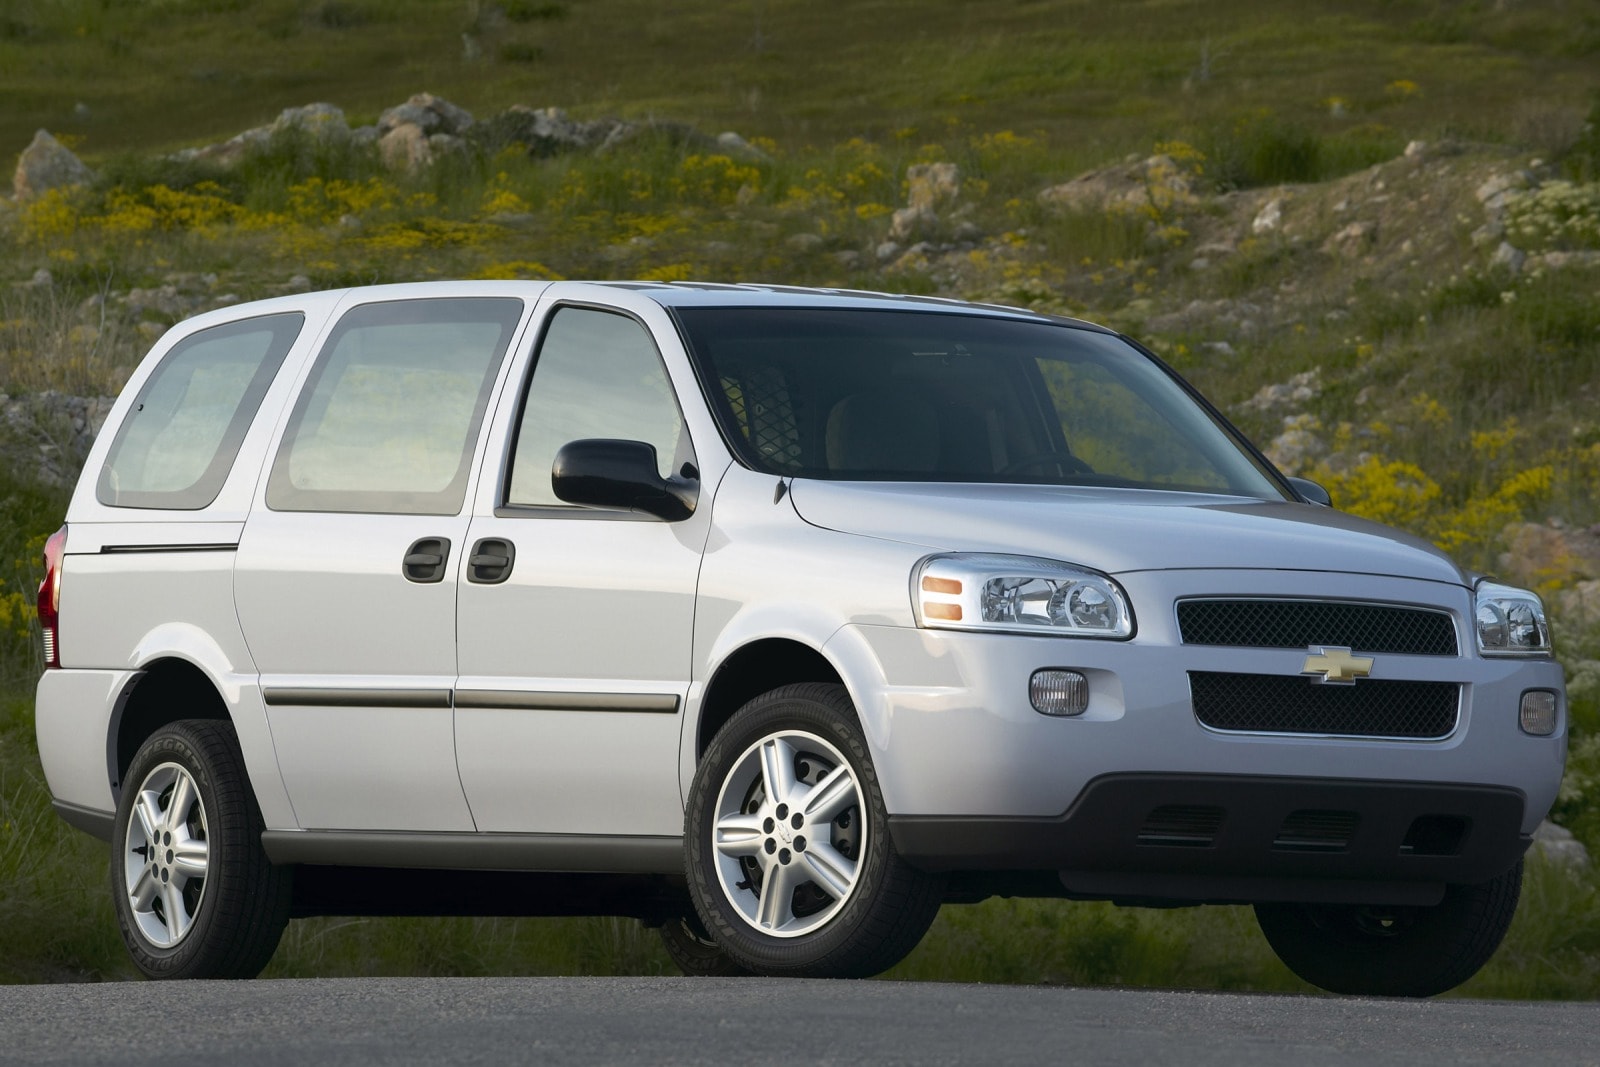 2007 Chevy Uplander Review & Ratings | Edmunds